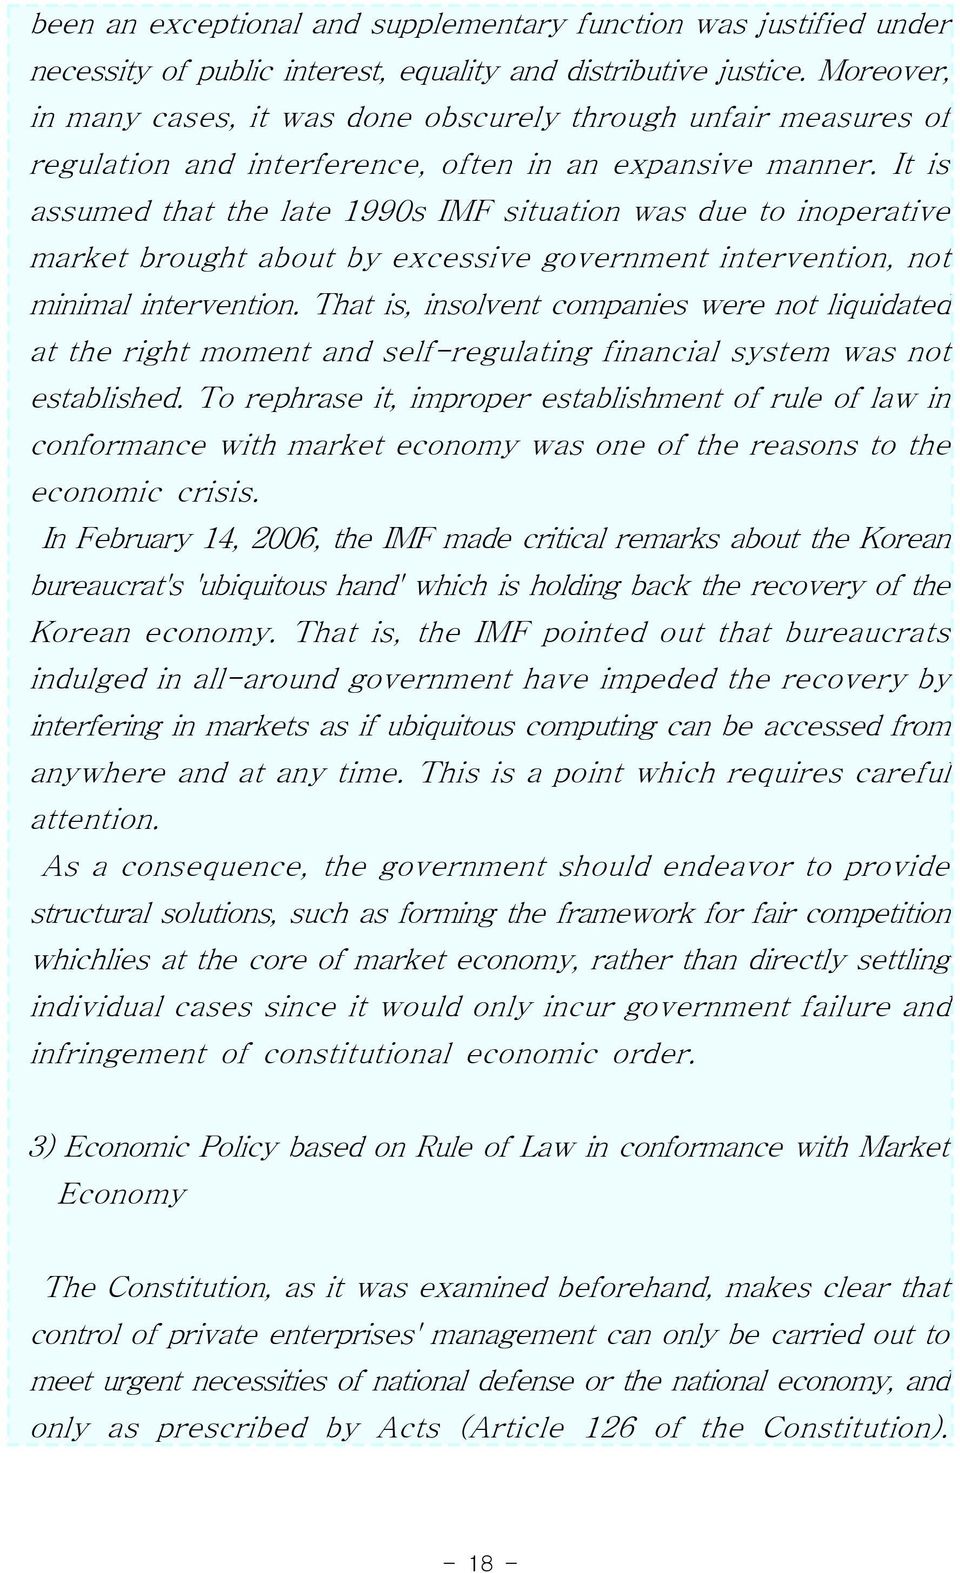 It is assumed that the late 1990s IMF situation was due to inoperative market brought about by excessive government intervention, not minimal intervention.